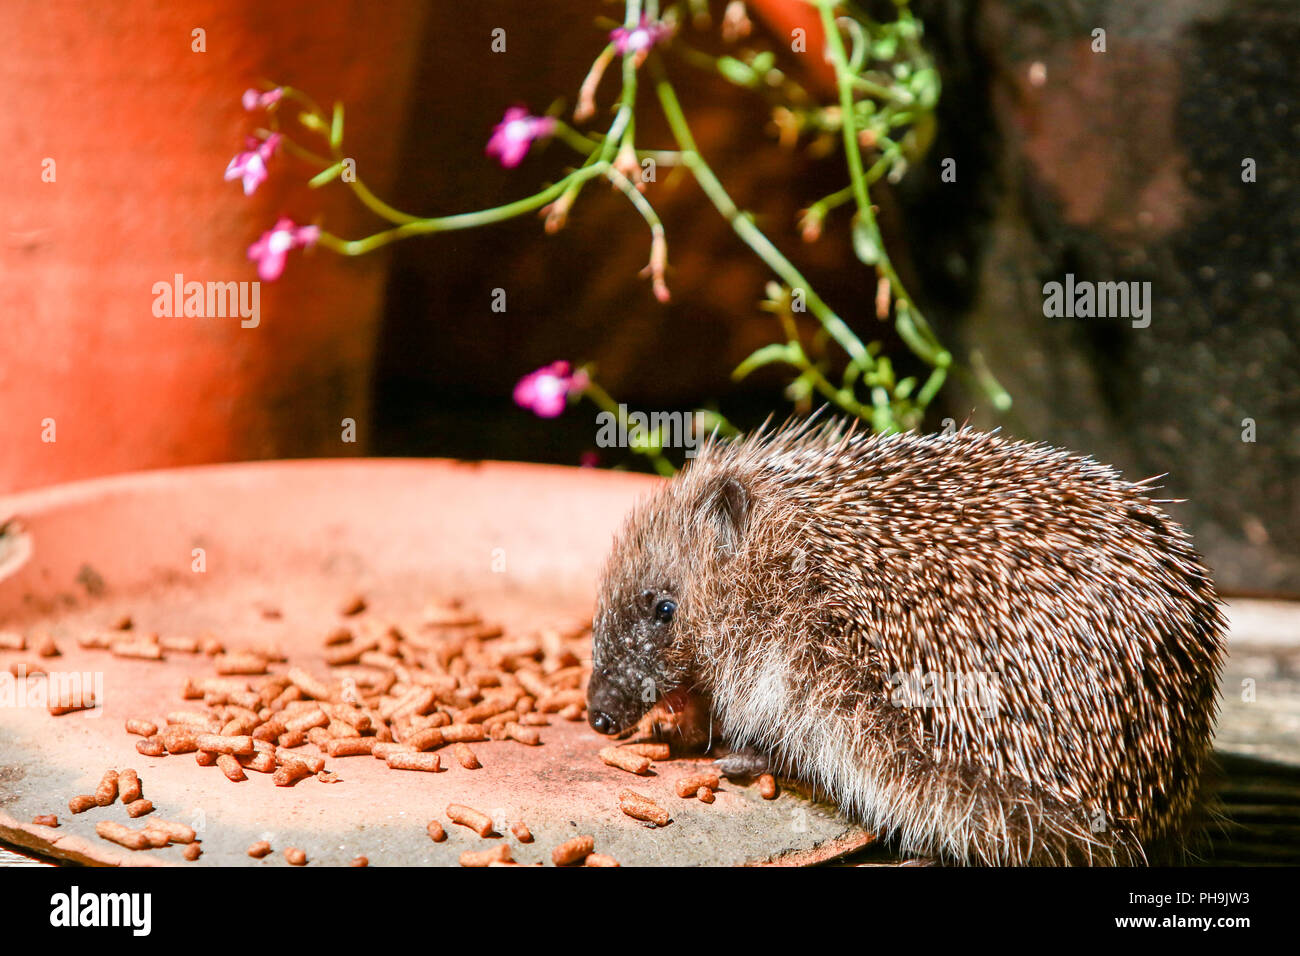 Native English hedgehog babies, or hoglets, eating in a suburban garden after dark Stock Photo